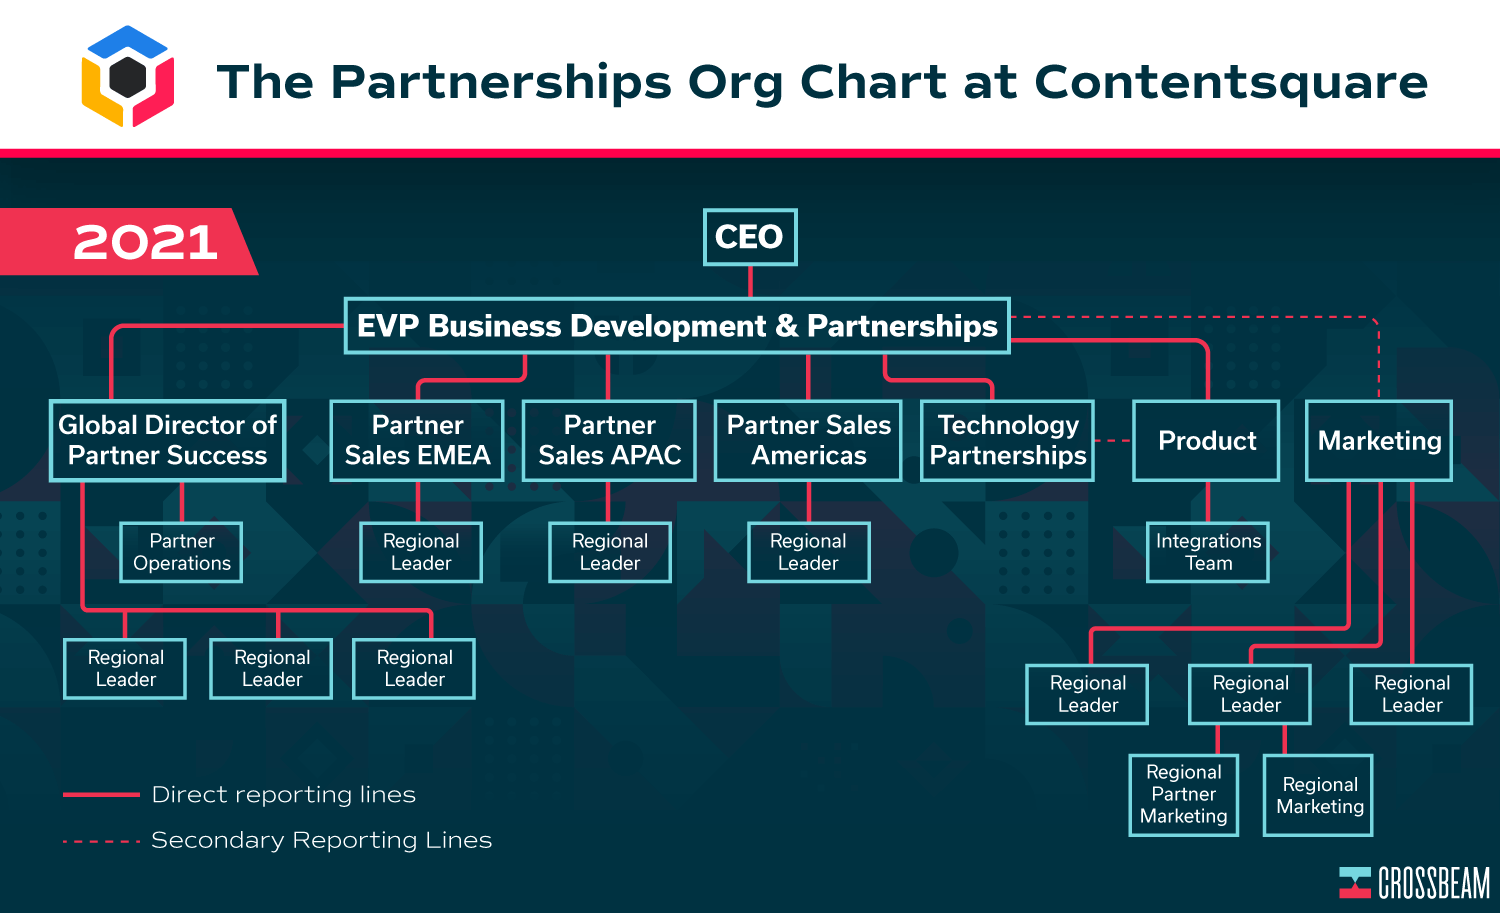 crossbeam-partnerships-team-org-charts-contentsquare